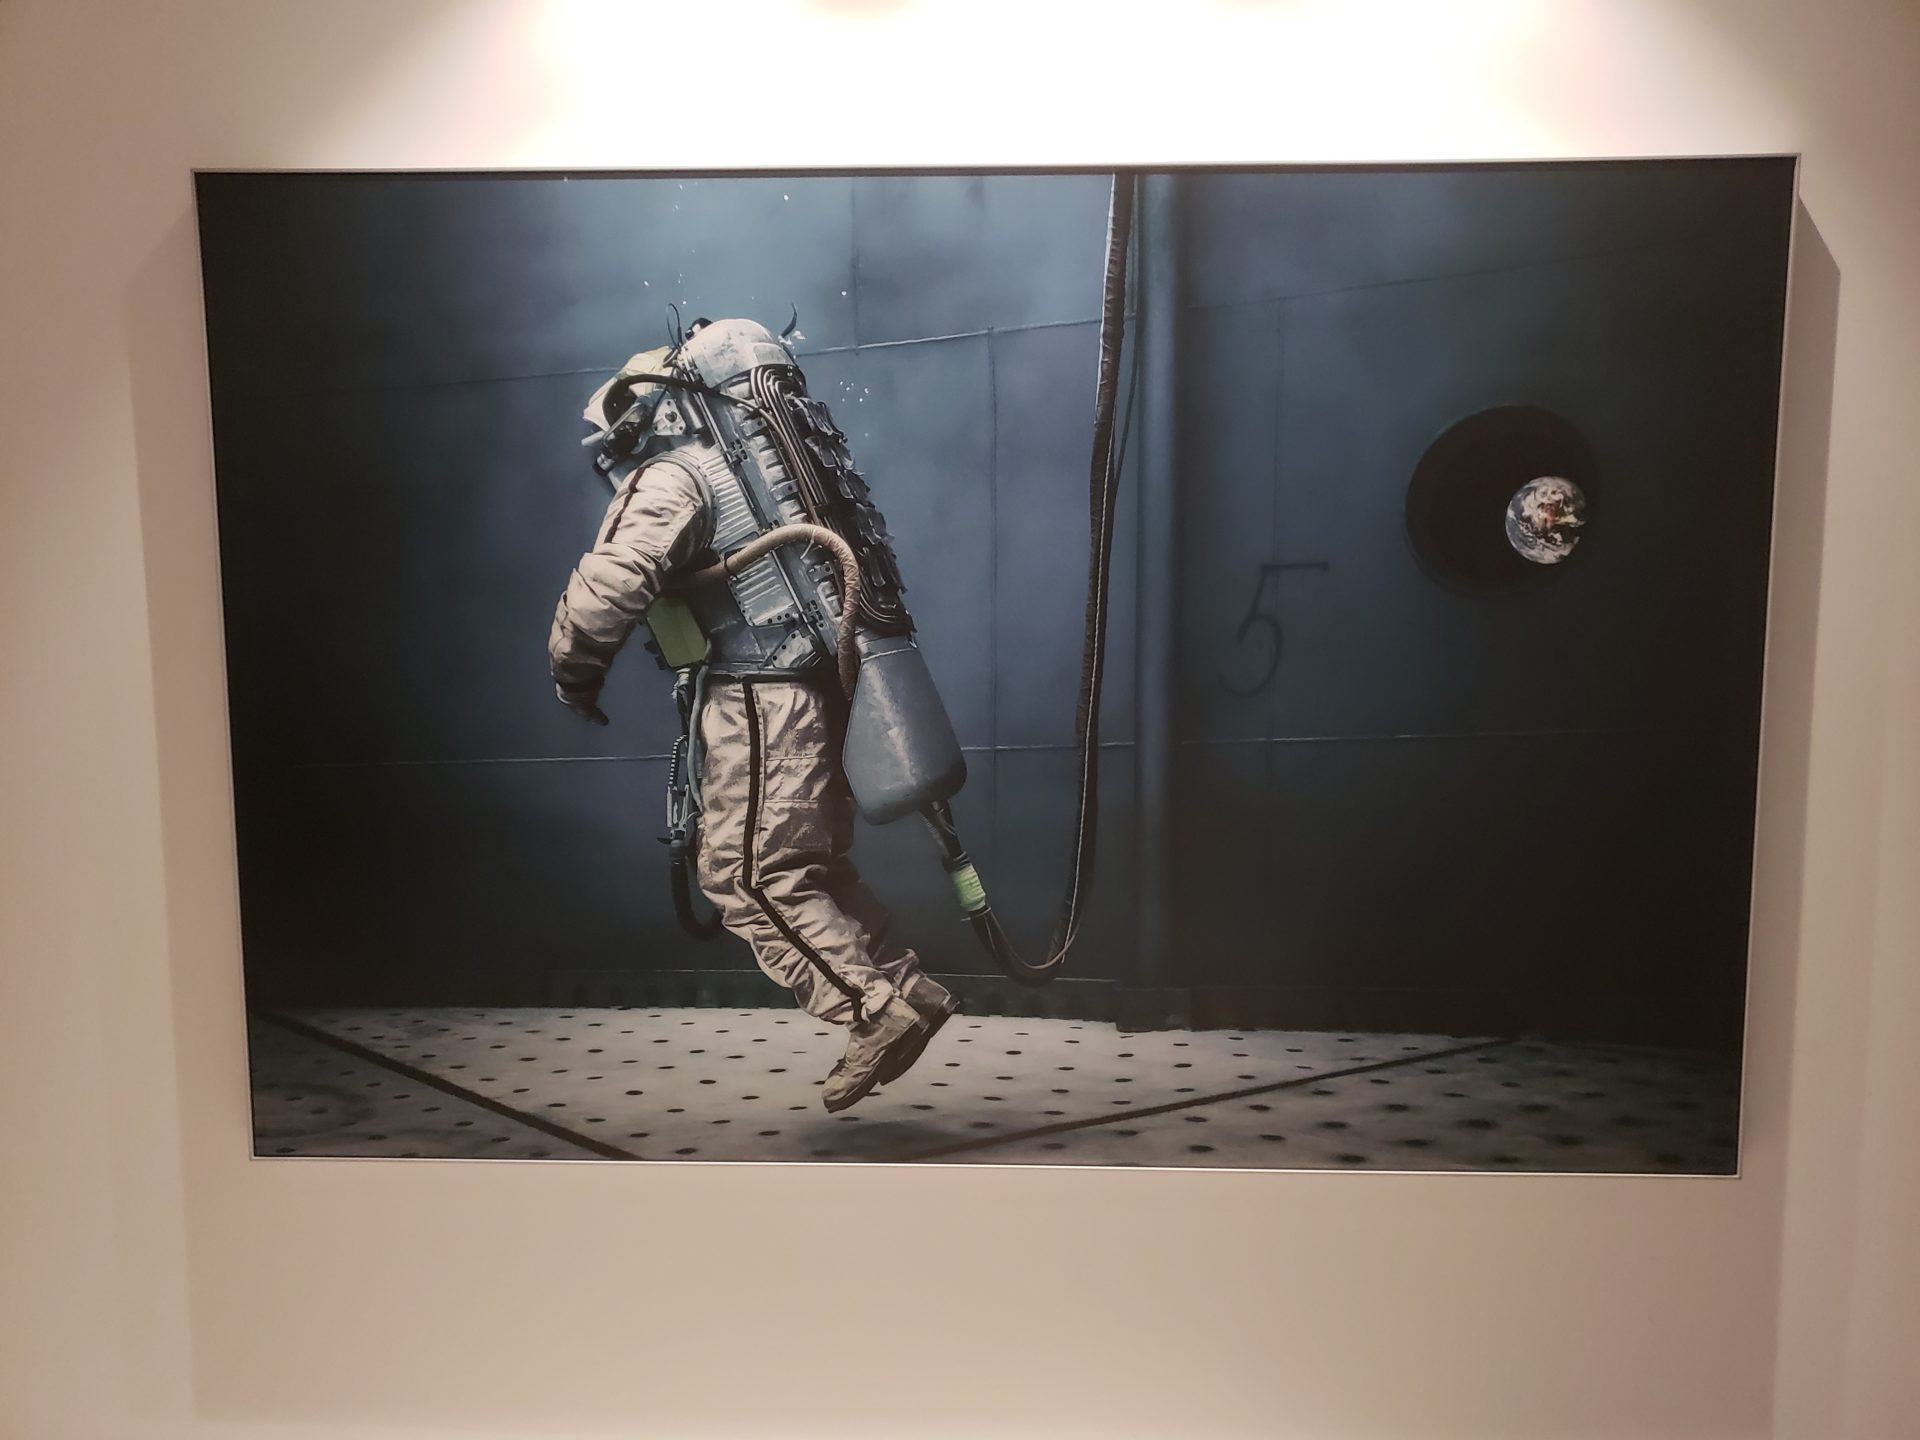 a picture of a person in a space suit